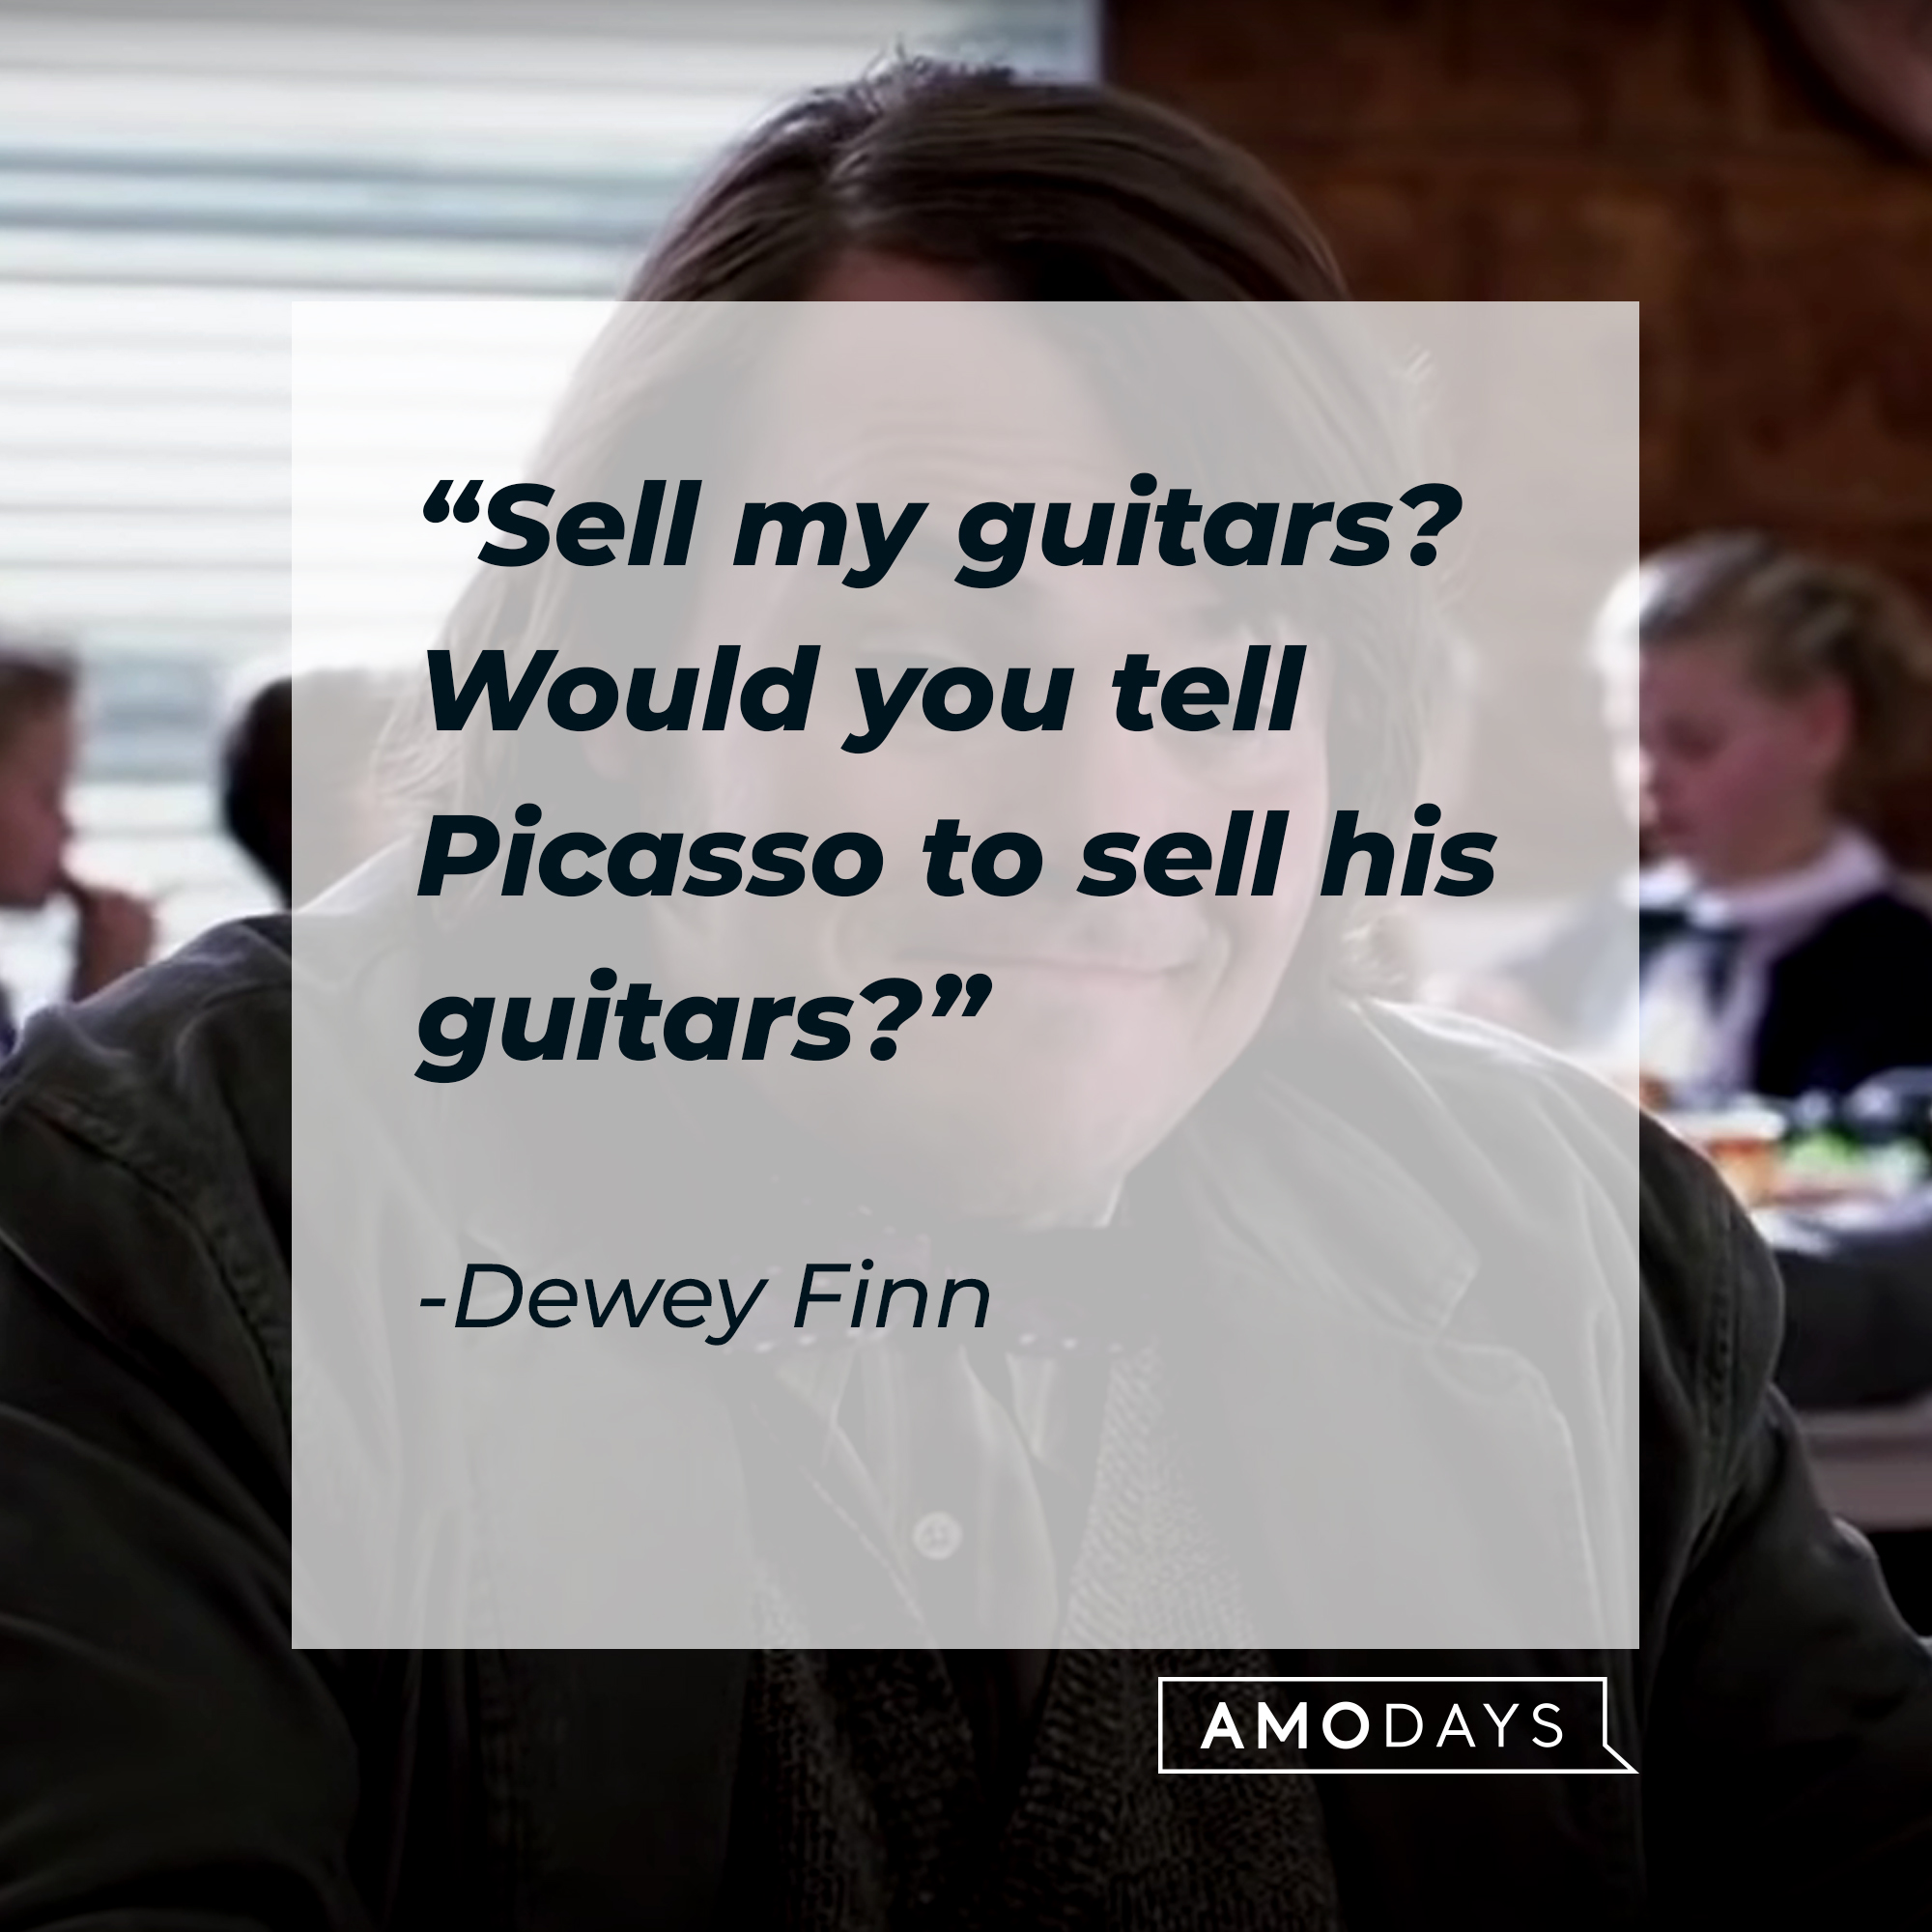 Dewey Finn, with his quote: “Sell my guitars? Would you tell Picasso to sell his guitars?” | Source: youtube.com/paramountpictures